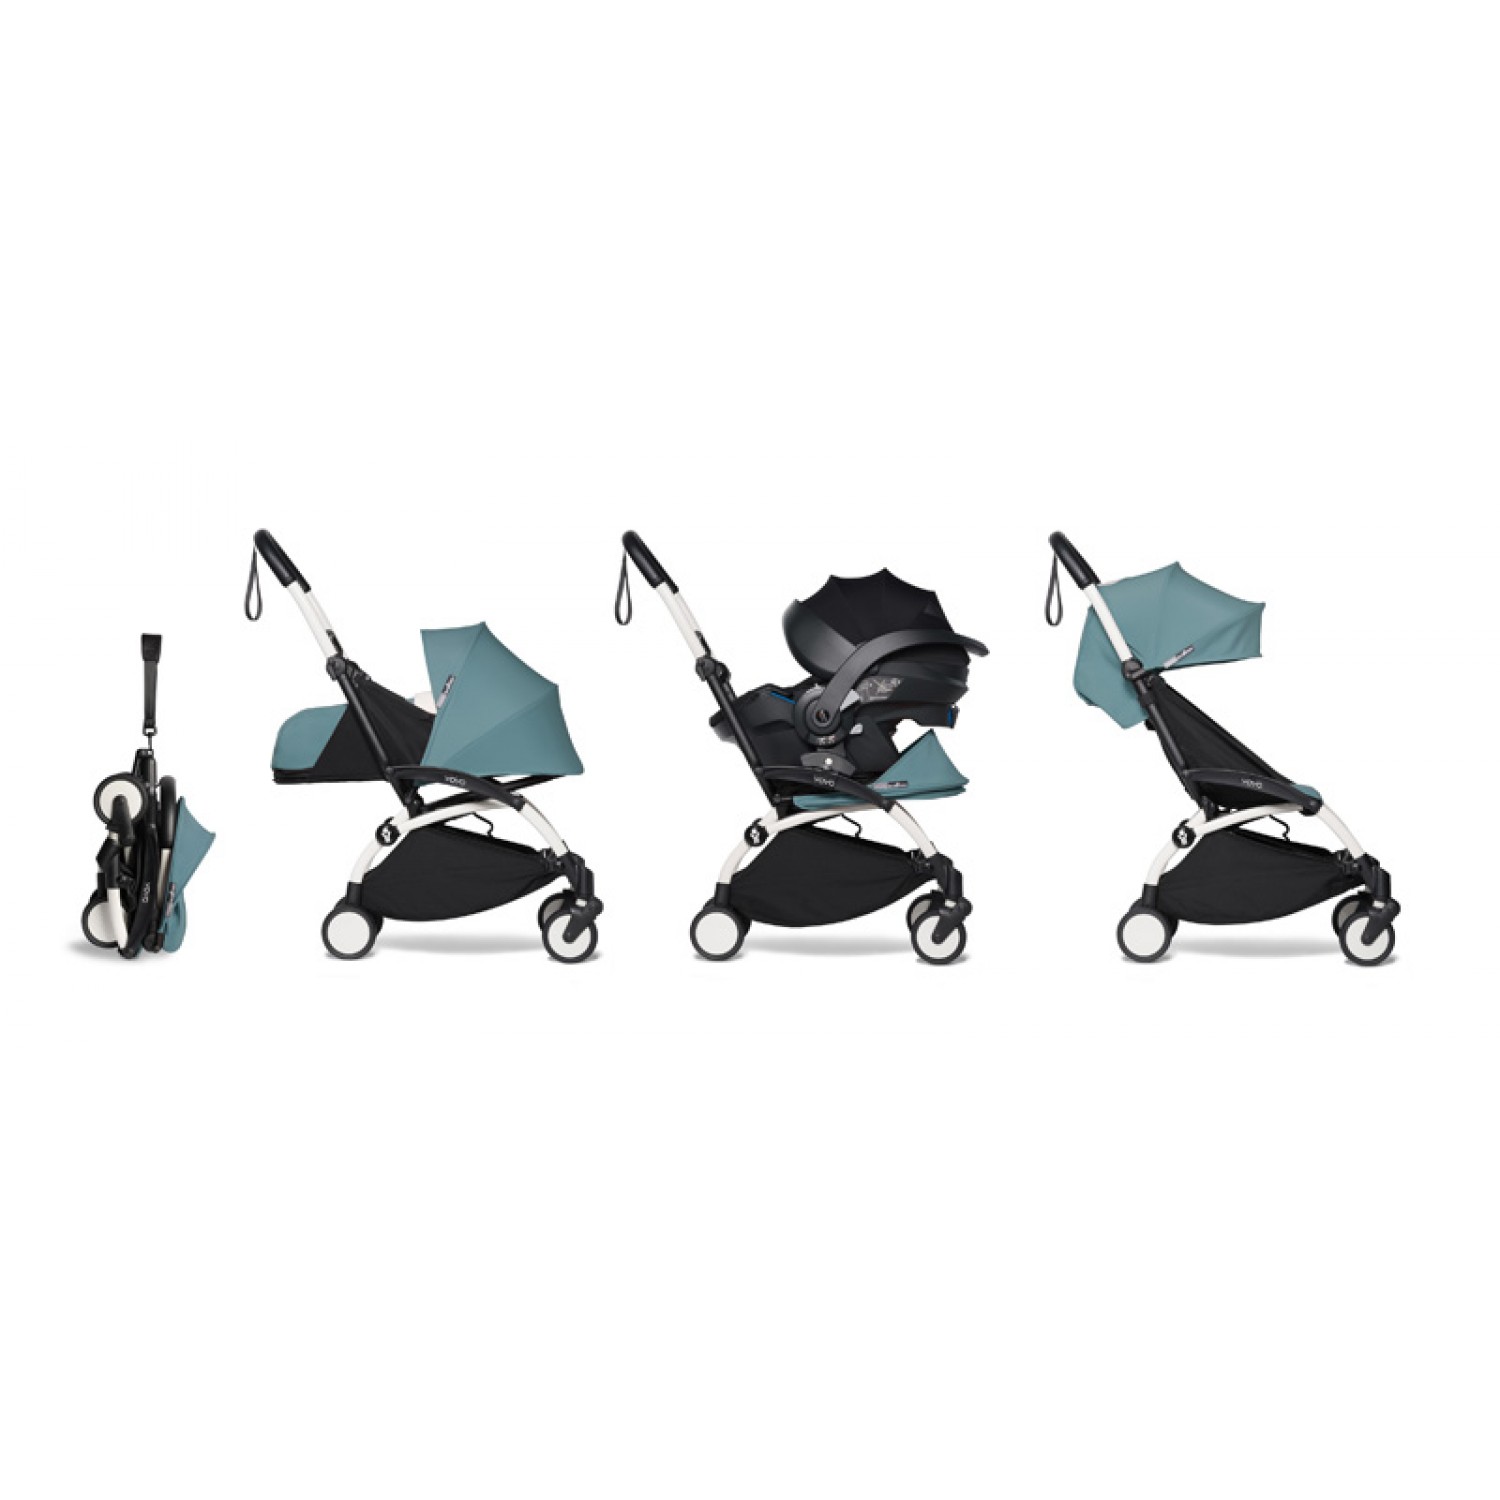 All-in-one BABYZEN stroller YOYO2 0+, car seat and 6+ | White Chassis Aqua